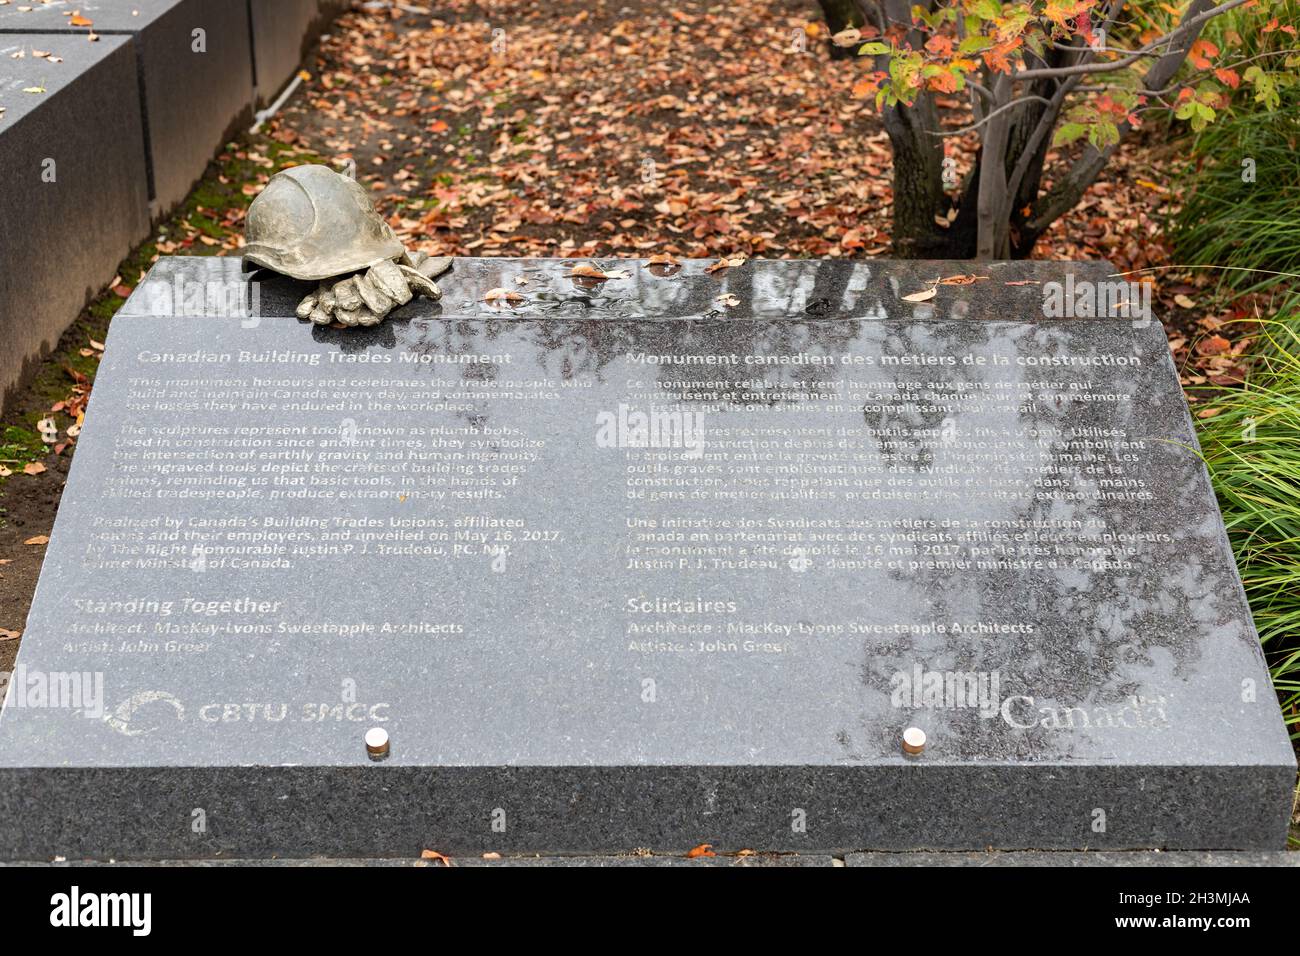 Ottawa, Canada - October 14, 2021: Canadian Building Trades Monument in Major's Hill Park Stock Photo